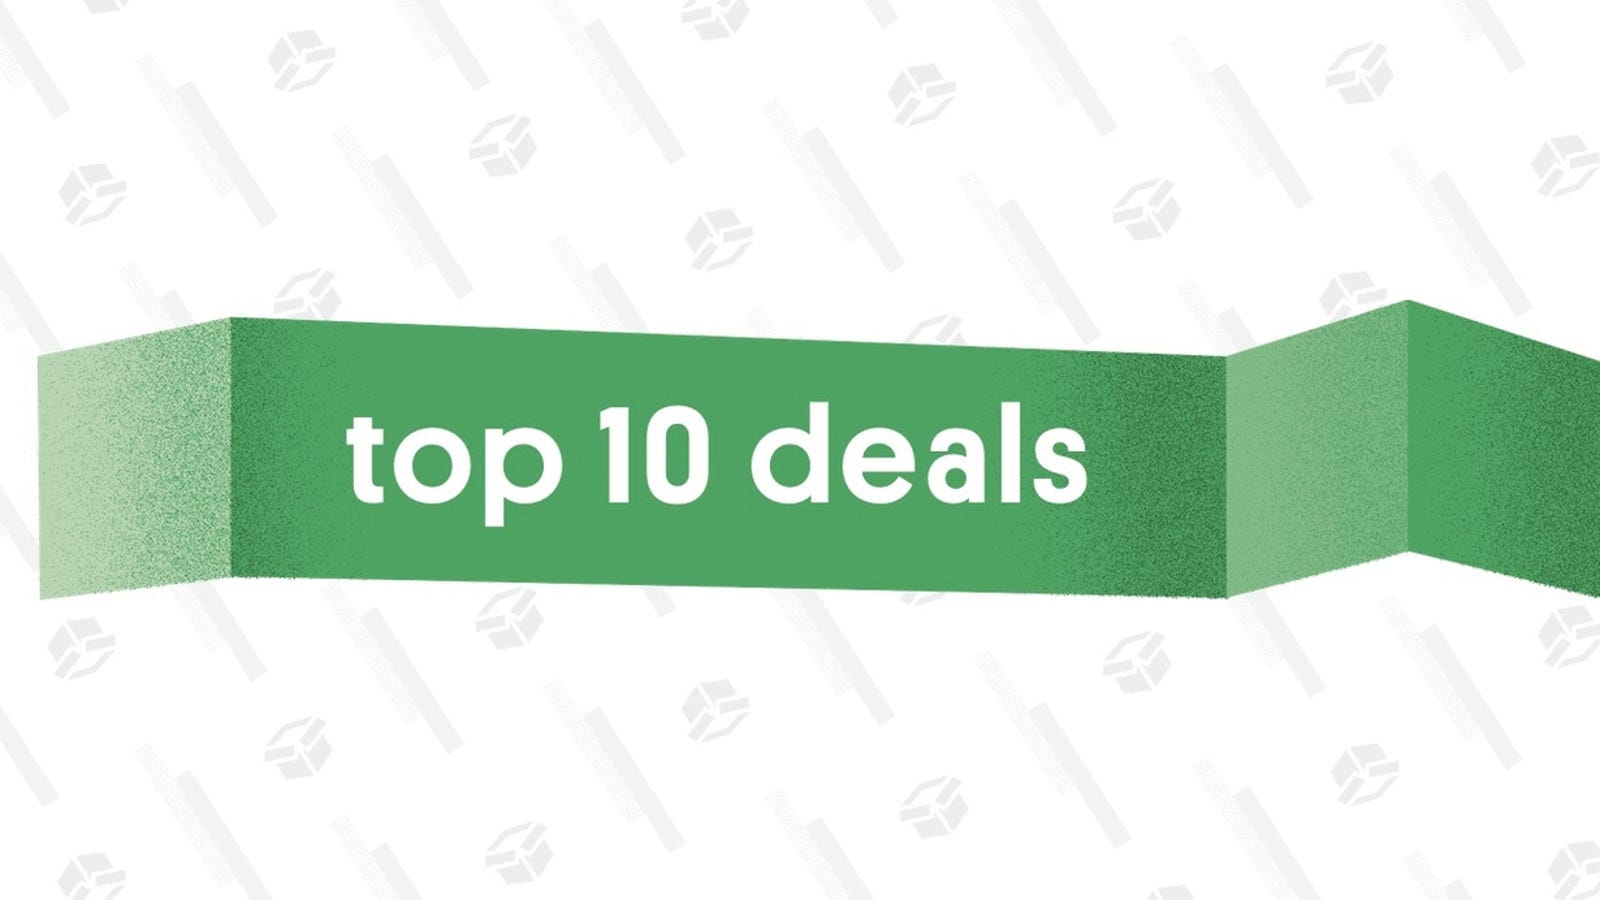 photo of The Top 10 Deals of January 16, 2019 image